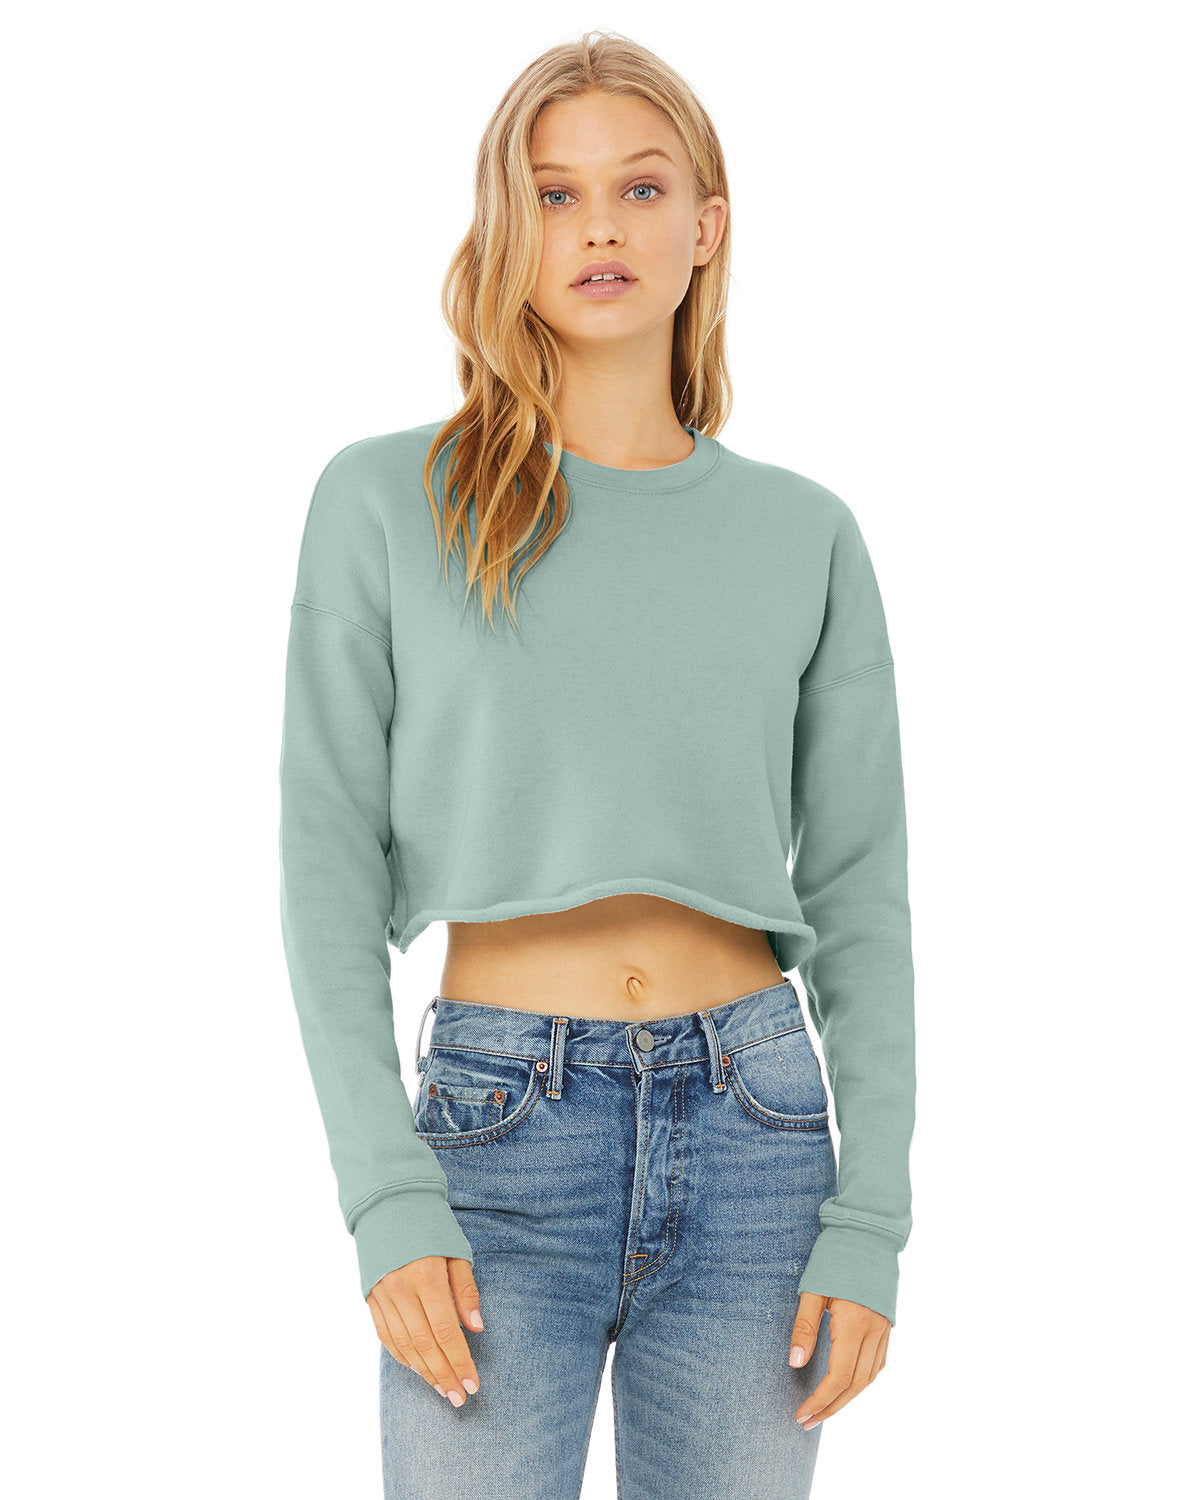 Dusty Blue cropped top crew. Front view.